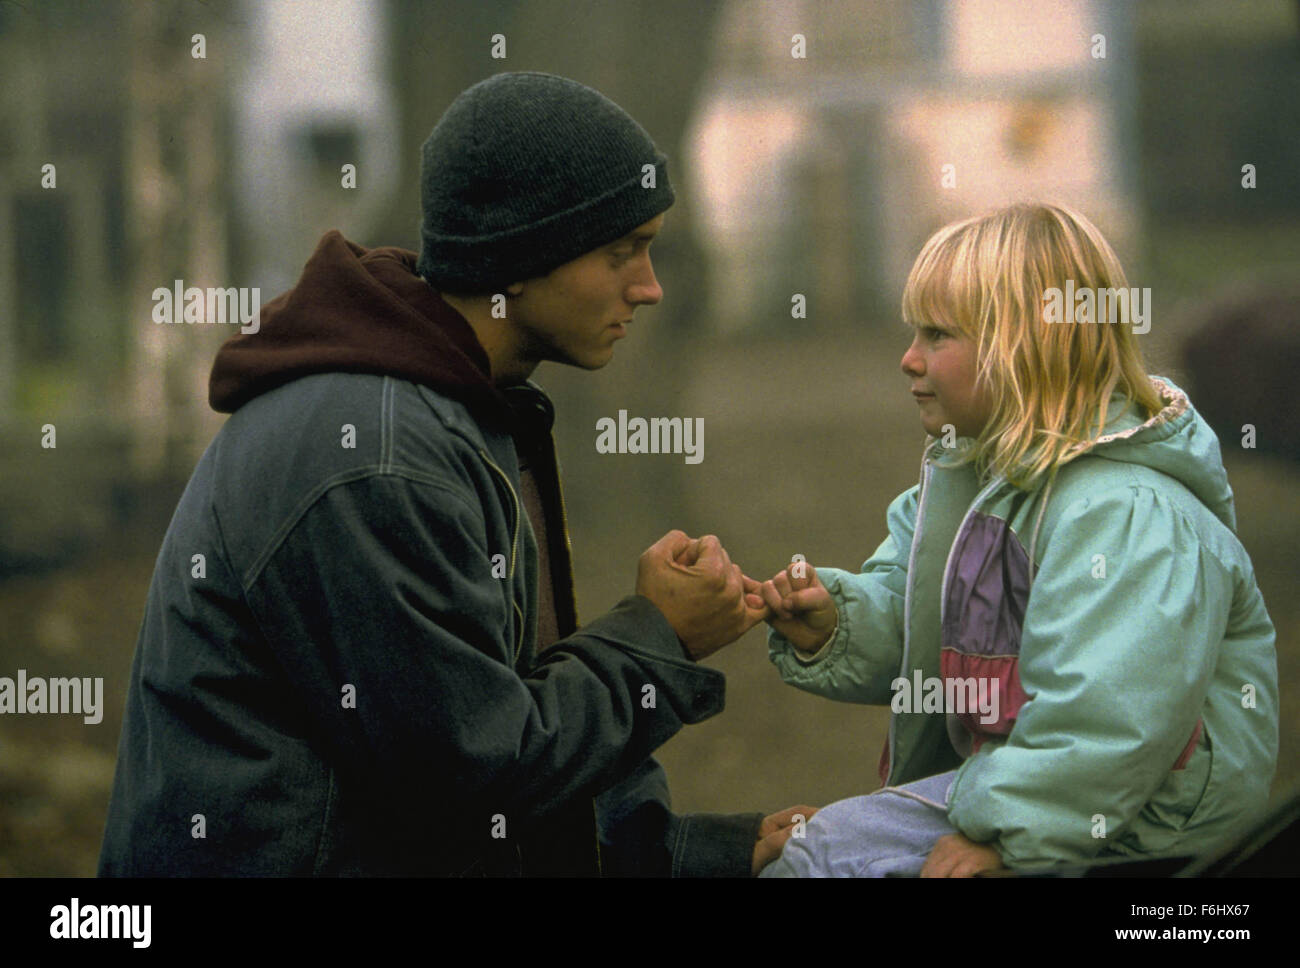 Aug 04, 2002; Hollywood, CA, USA; Actors EMINEM and CHLOE GREENFIELD star as Jimmy Smith Jr. and Stephanie Smith in the musical drama '8 Mile' directed by Curtis Hanson.  A young rapper (Eminem) in Detroit struggles with his anger and social status through music. Stock Photo